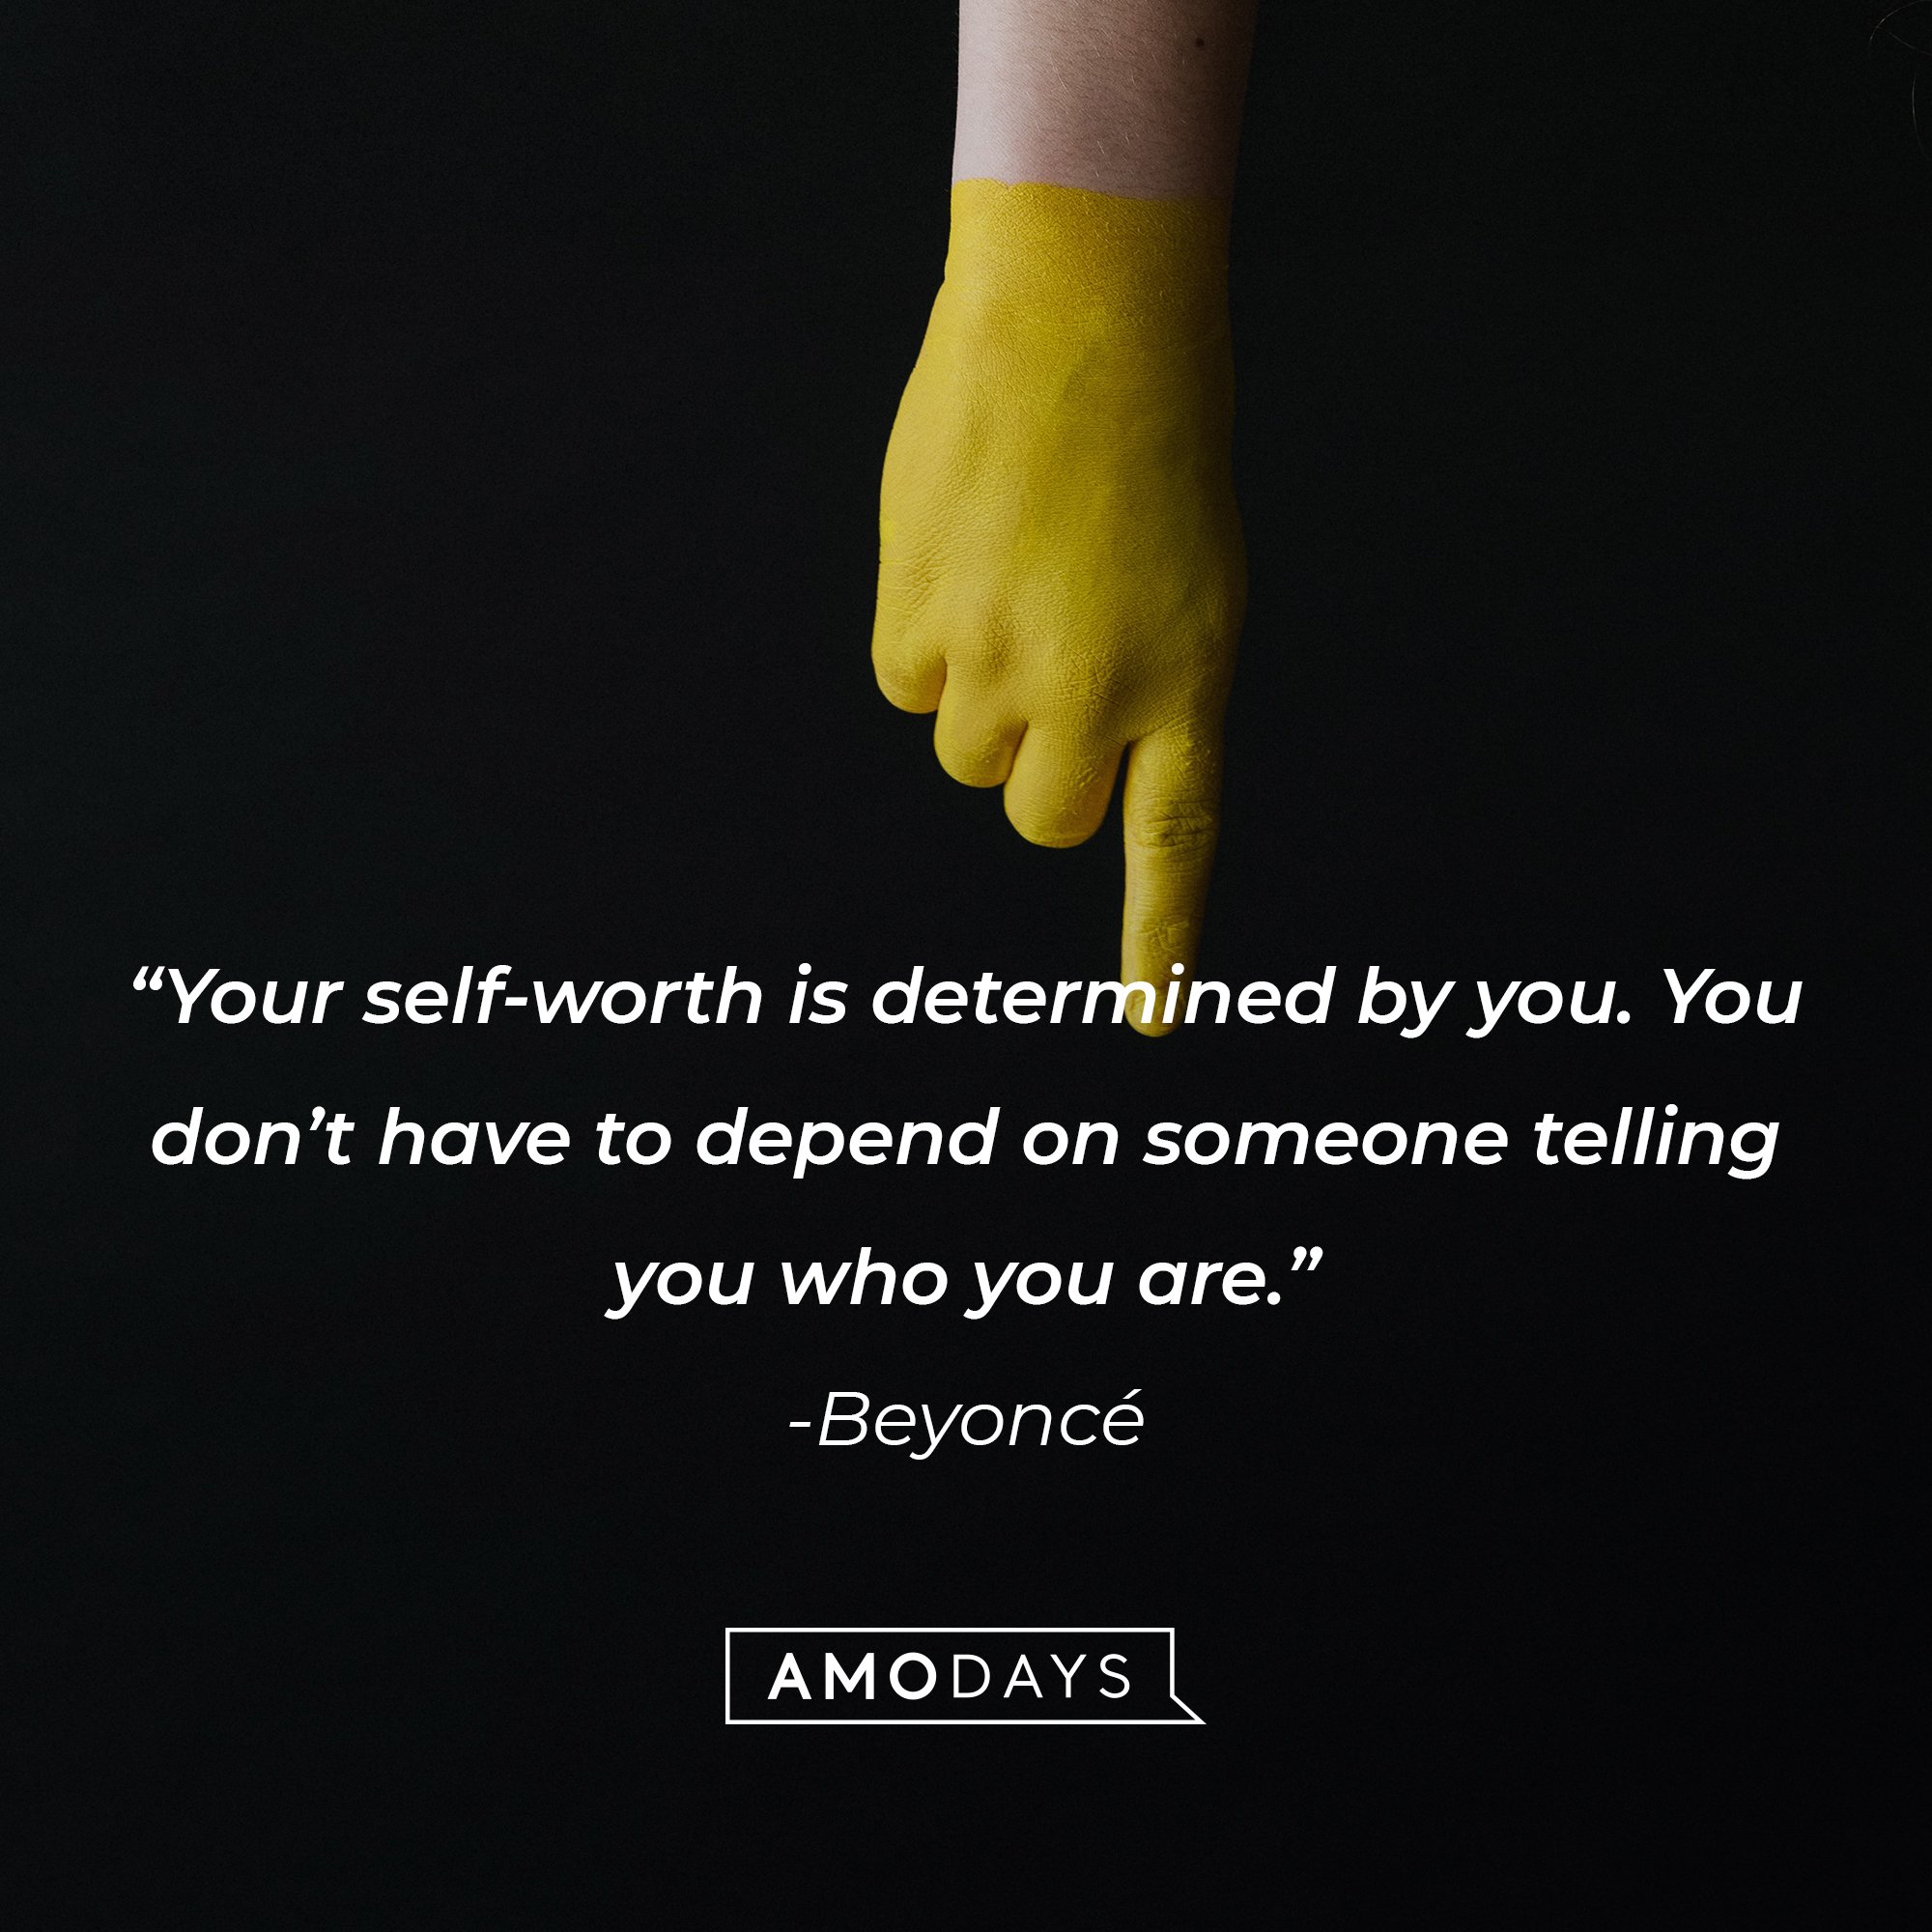 Beyoncé‘s quote:“Your self-worth is determined by you. You don’t have to depend on someone telling you who you are.” | Image: Amodays    